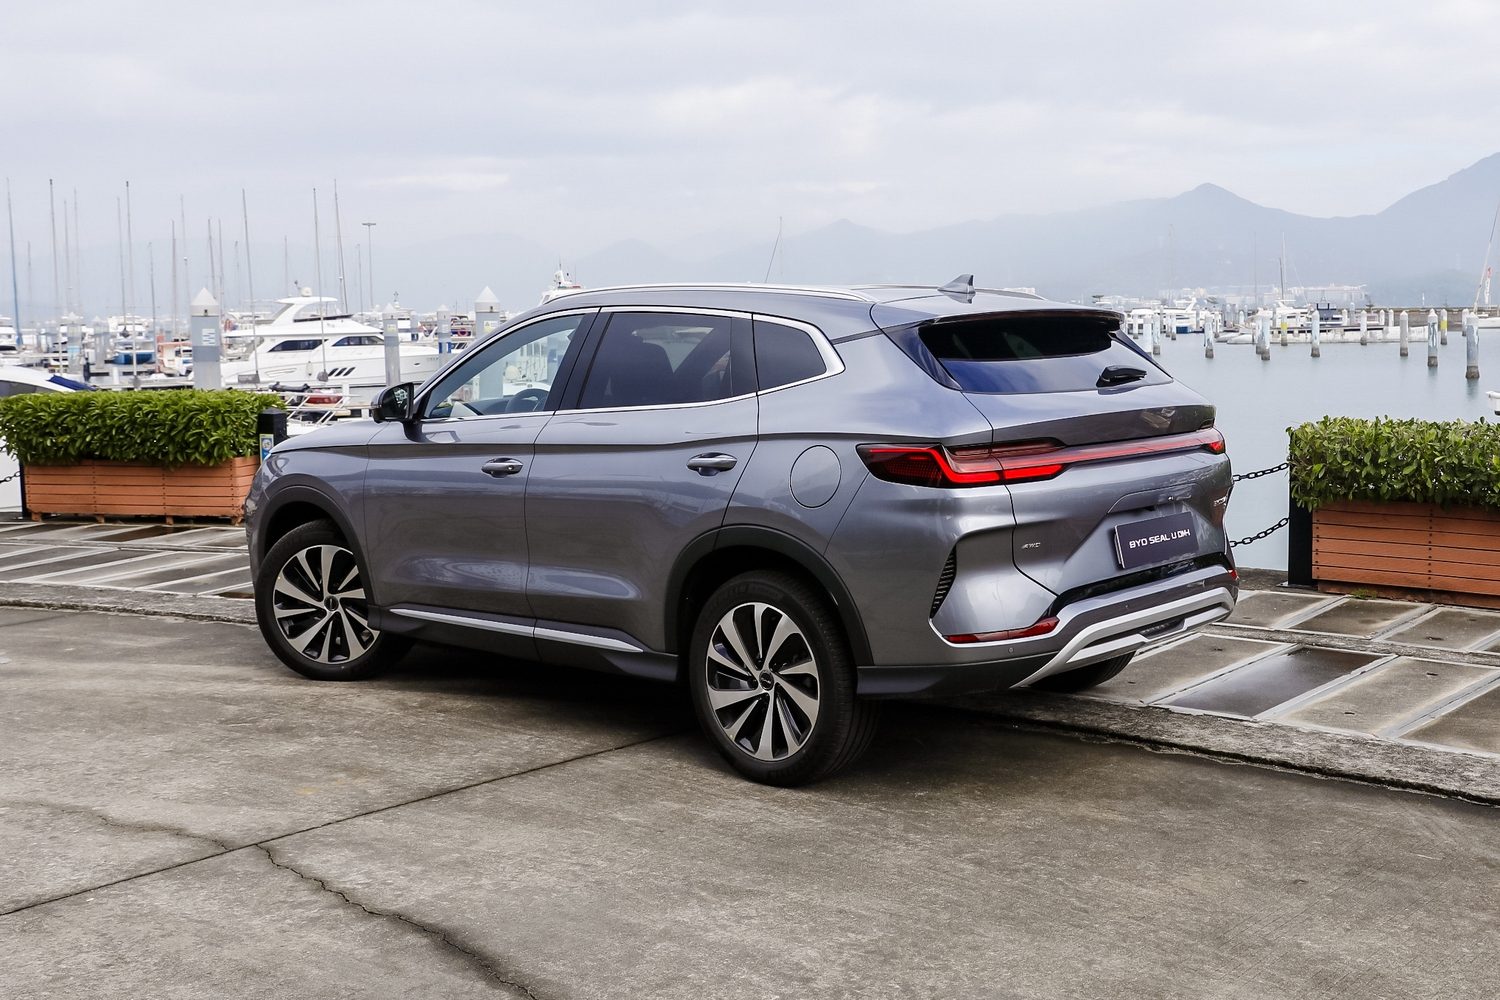 BYD Seal U arrives in Europe: the electrified family SUV due in 2024